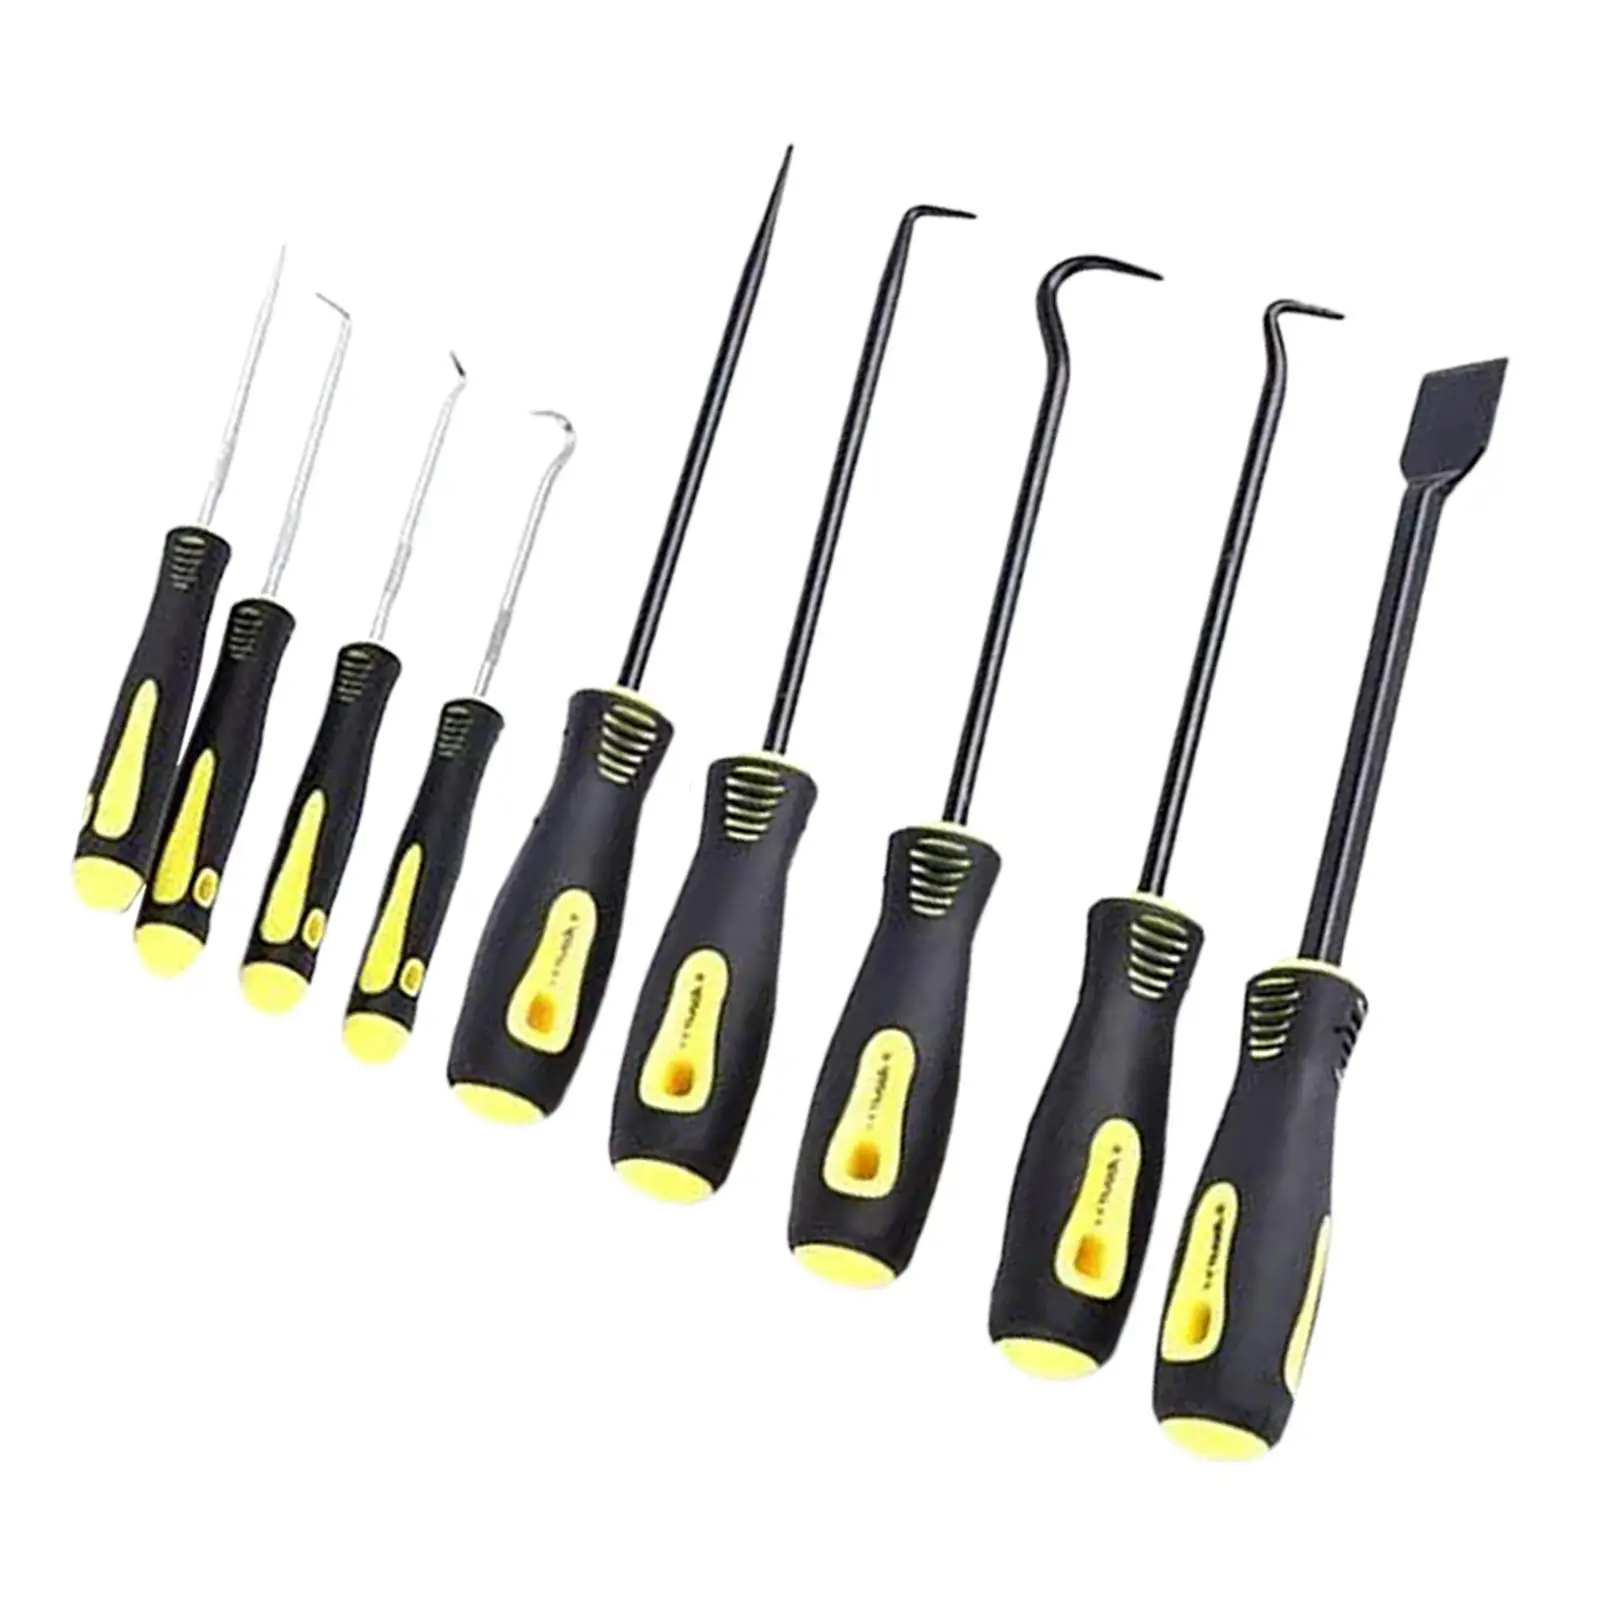 9x Heavy Duty Oil Seal Screwdriver Set Precision Hand Tools Oil Seal Hook Pick and Hook for Vehicle Auto Car Maintenance Tool